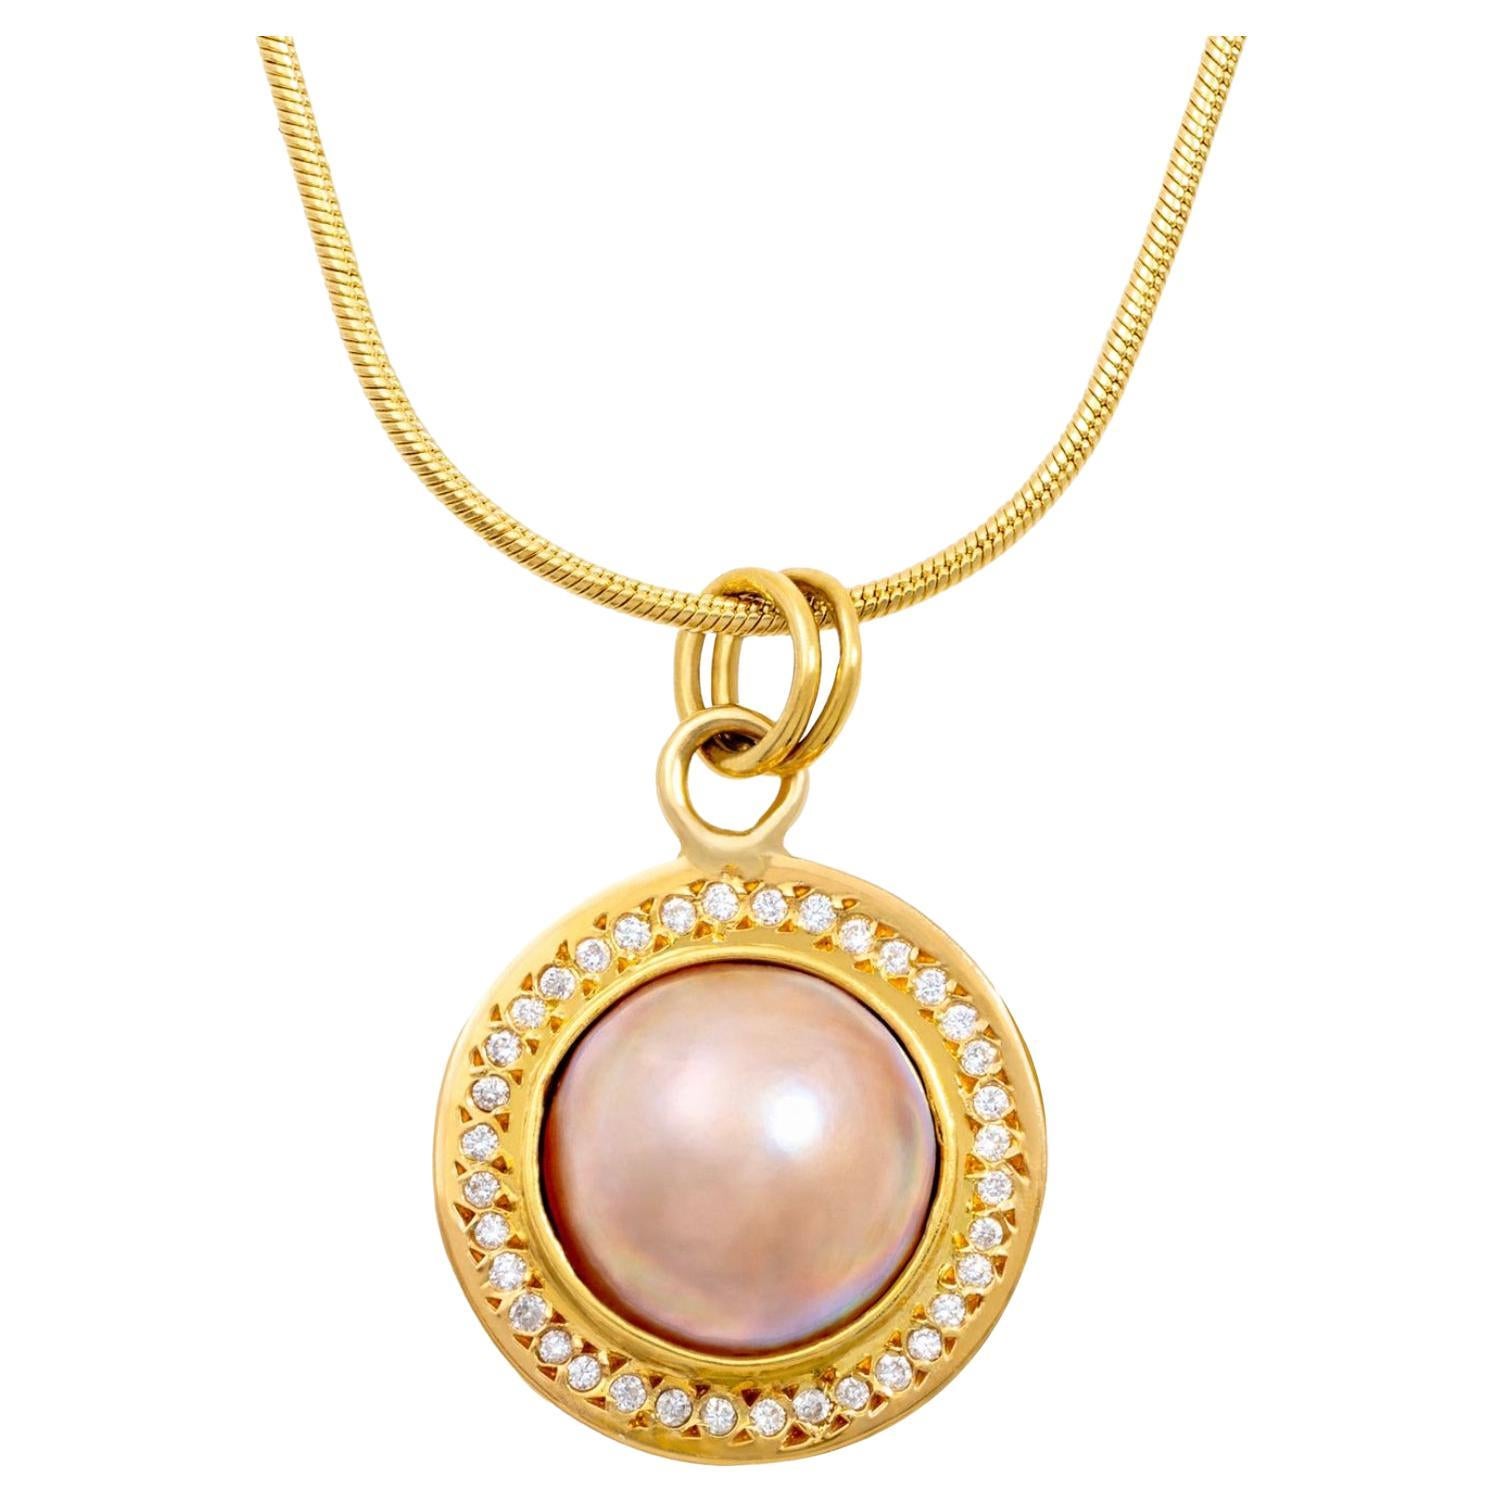 Paris & Lily, Handmade, 22k Gold, Pink Mabe Pearl Pendant with Diamonds